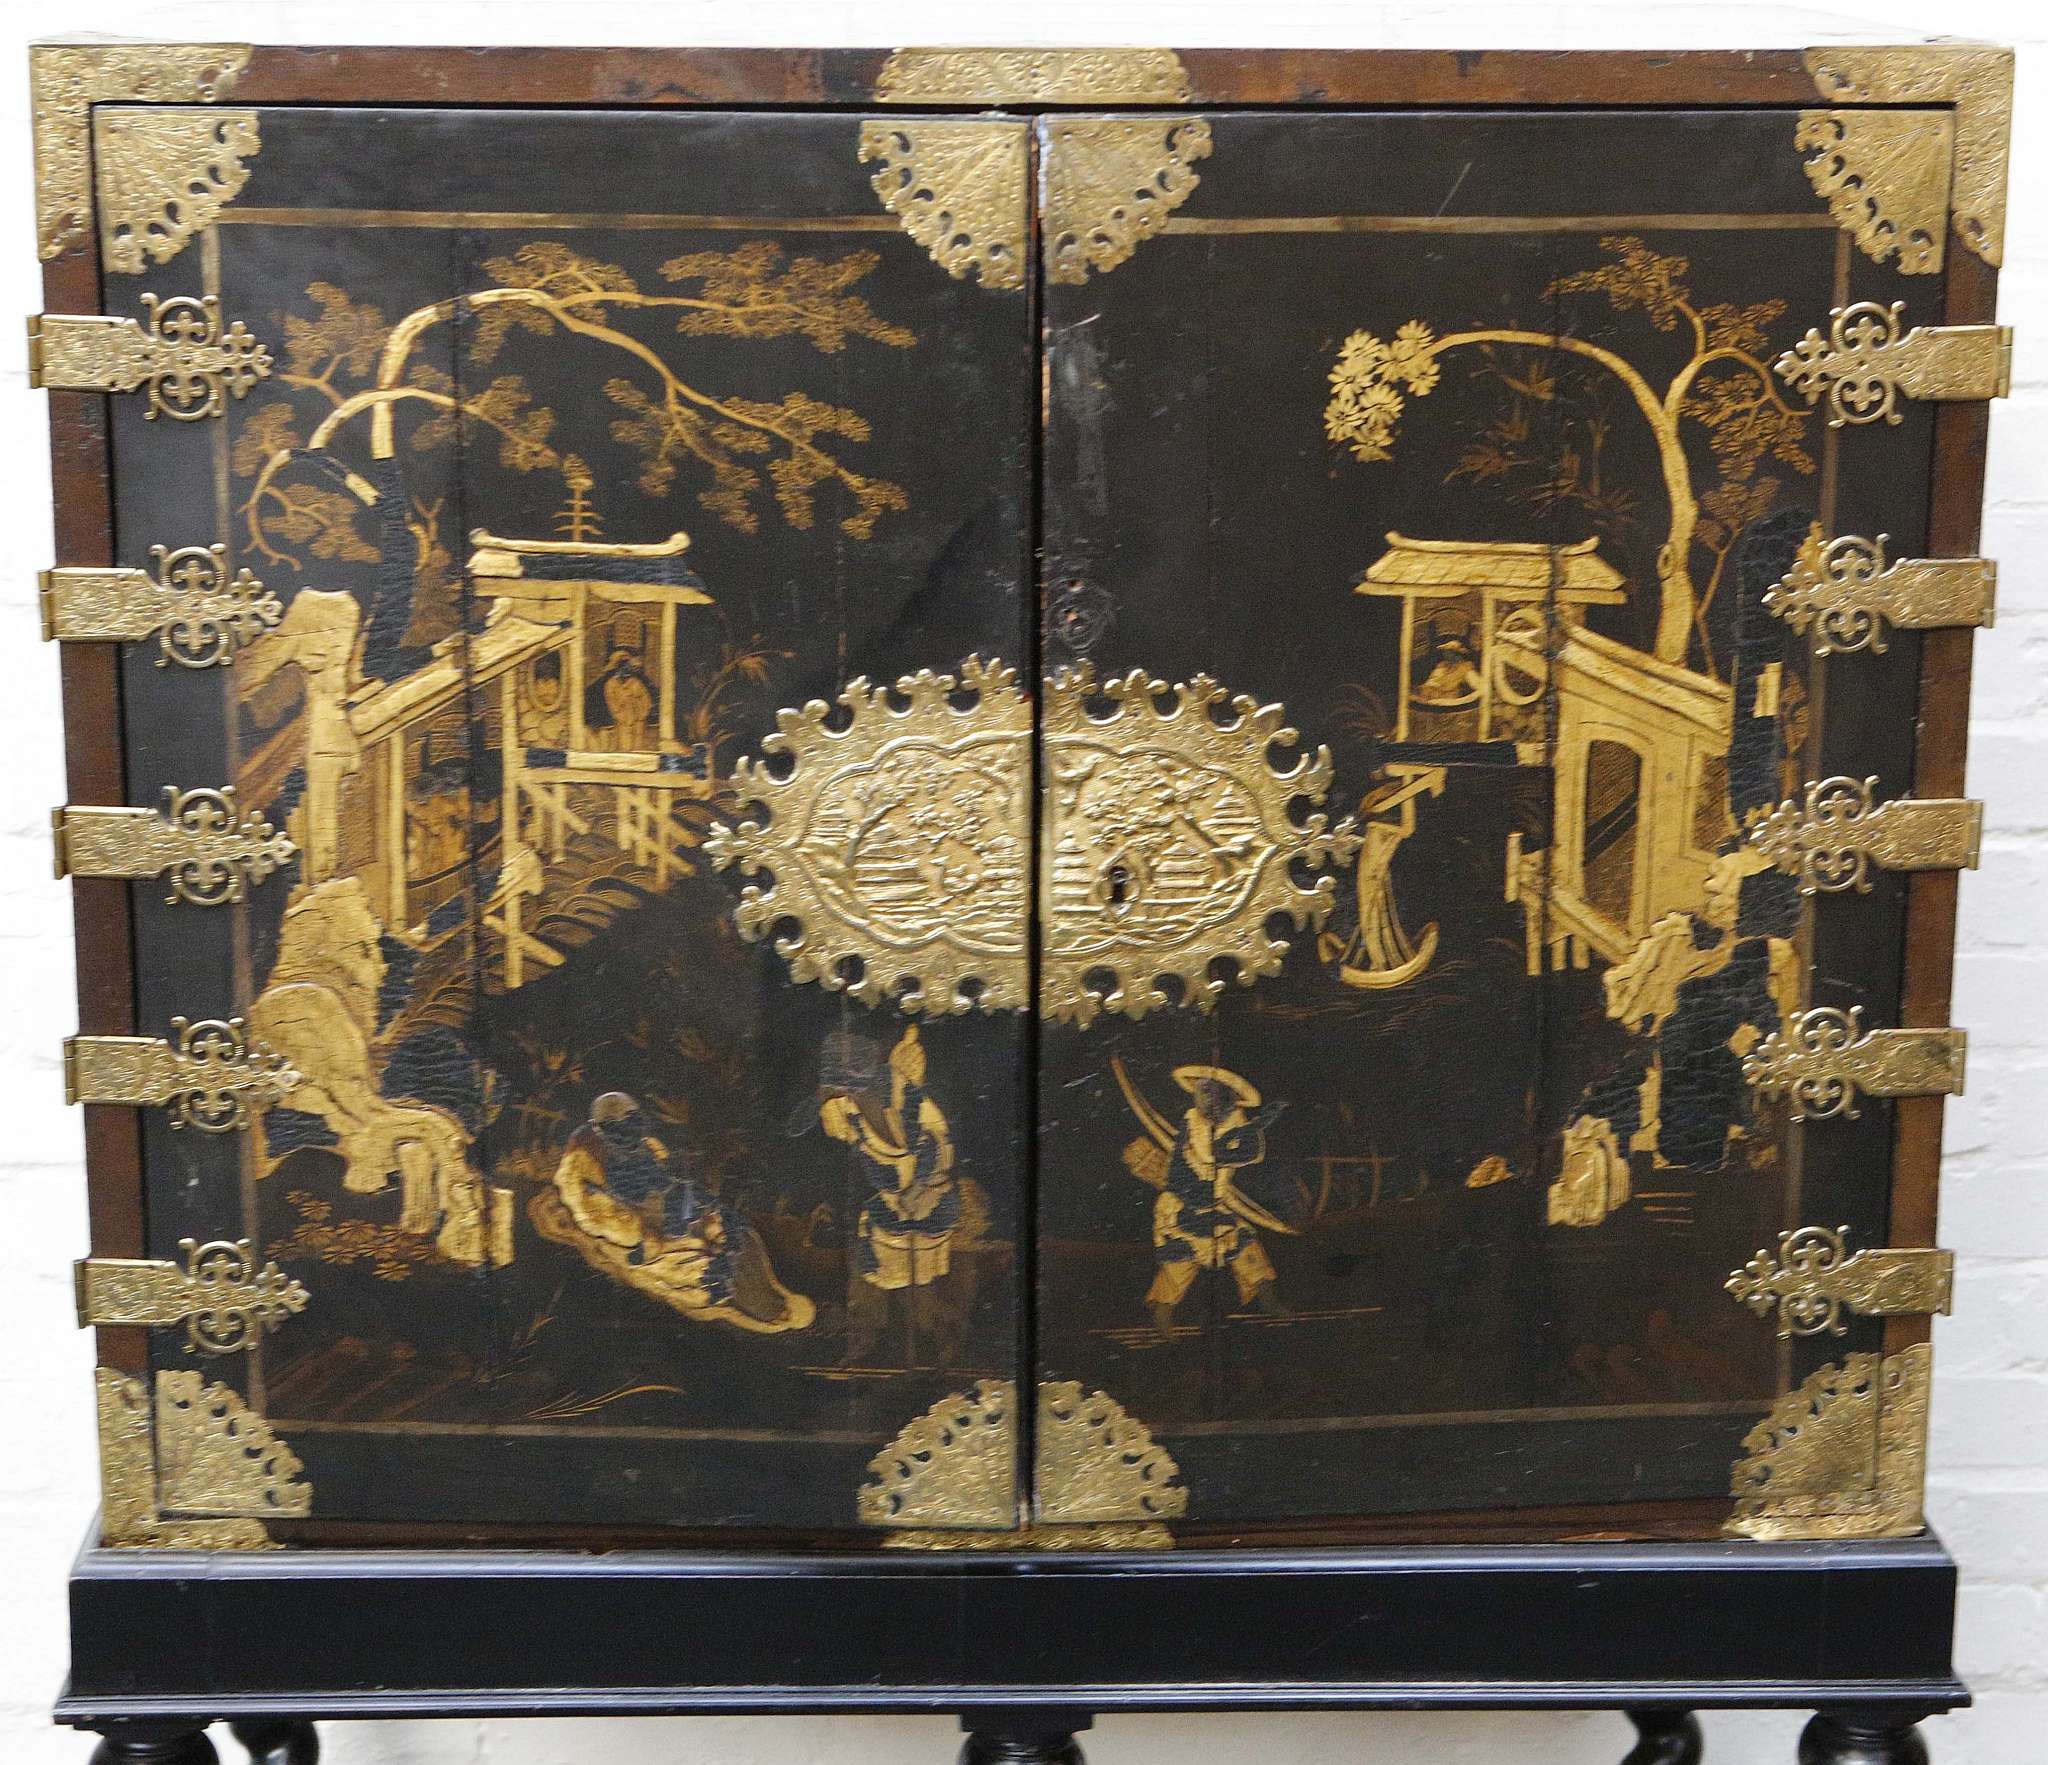 An 18th century chinoiserie black and gold lacquered two doored cabinet, opens to reveal many - Image 2 of 3